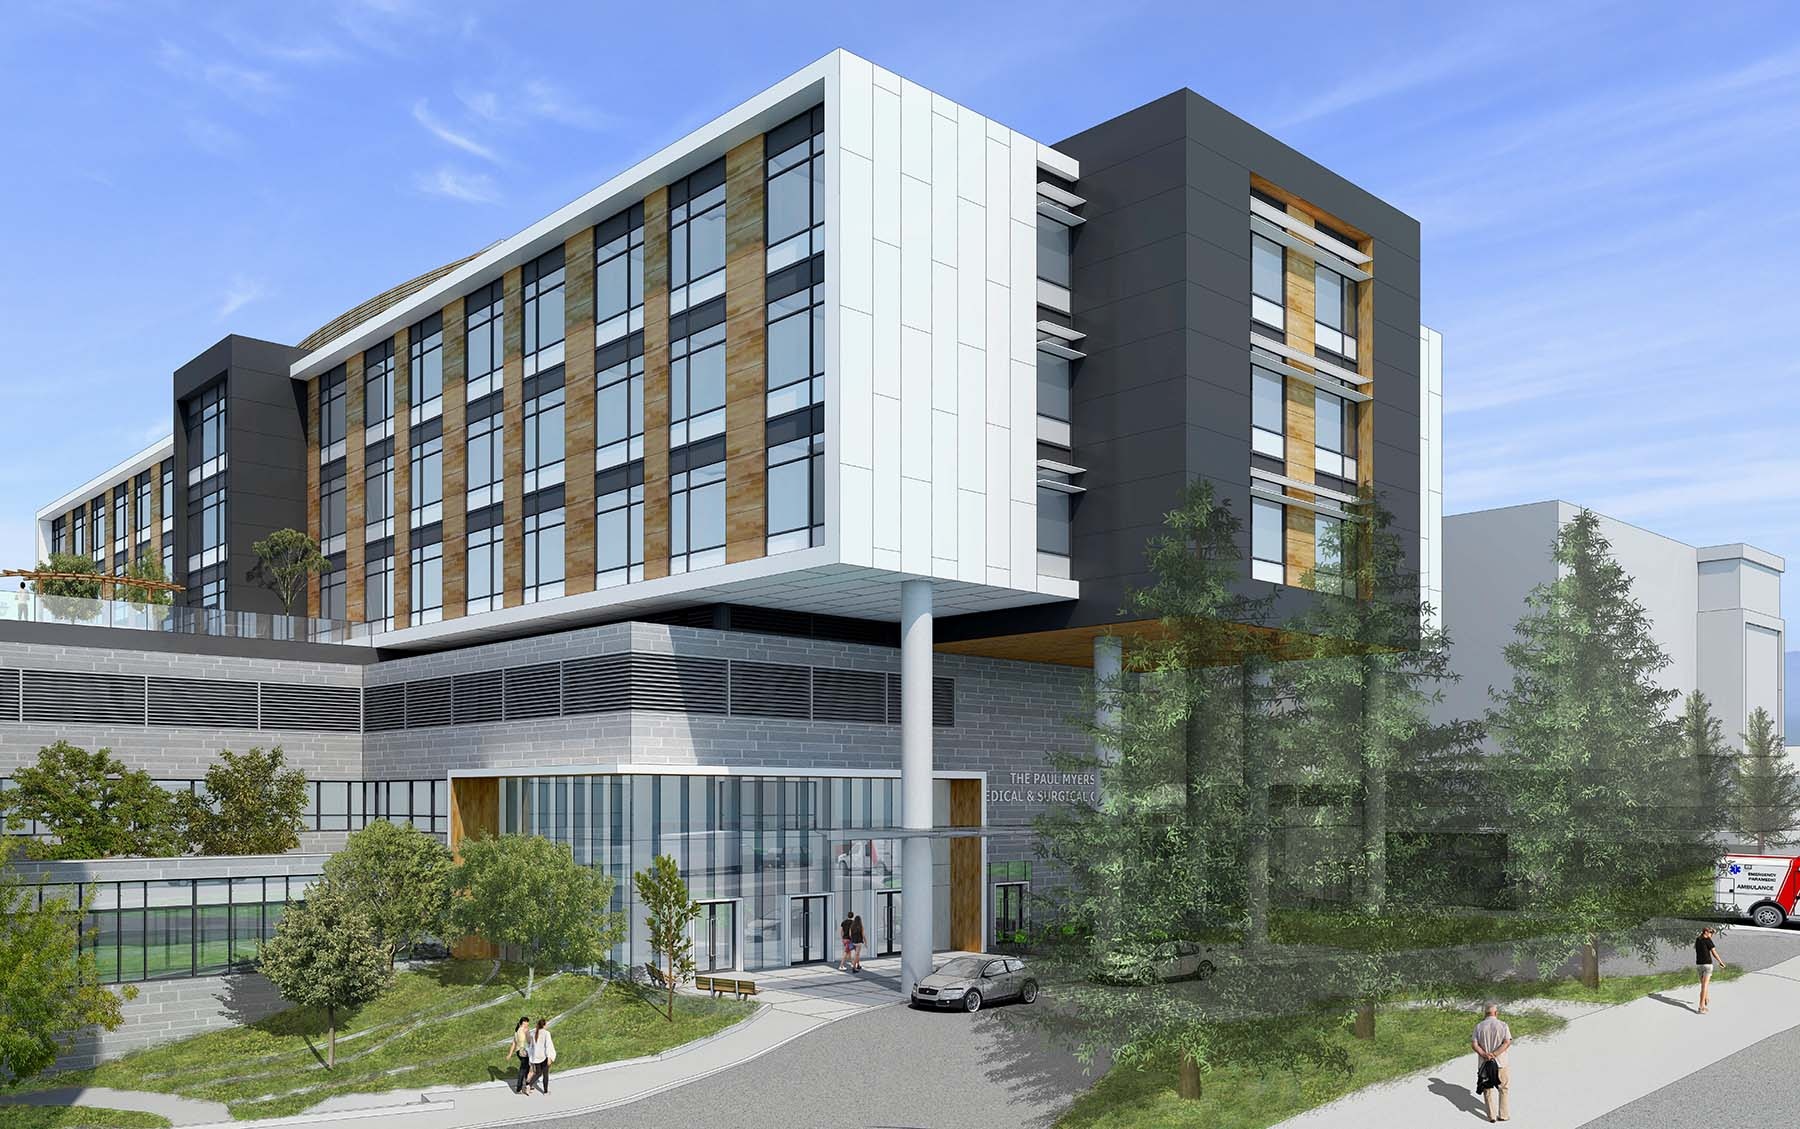 Lions Gate Hospital New $310M Acute Care Tower